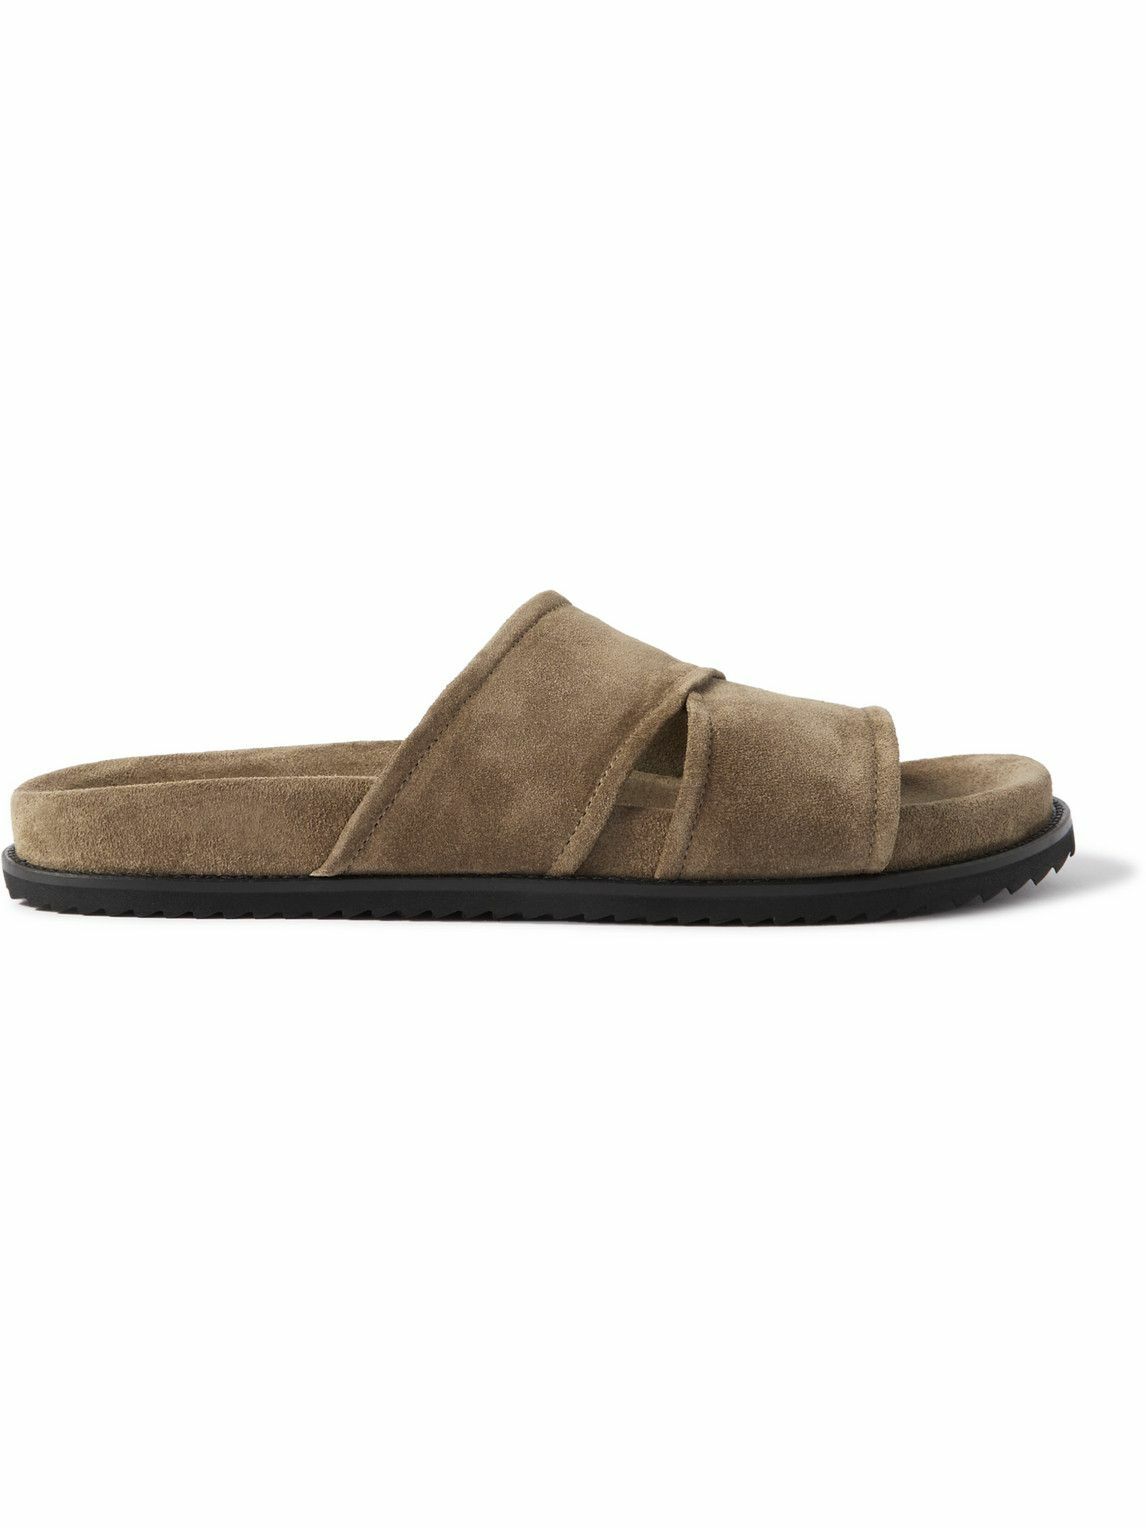 Mr P. - David Regenerated Suede by evolo® Sandals - Brown Mr P.